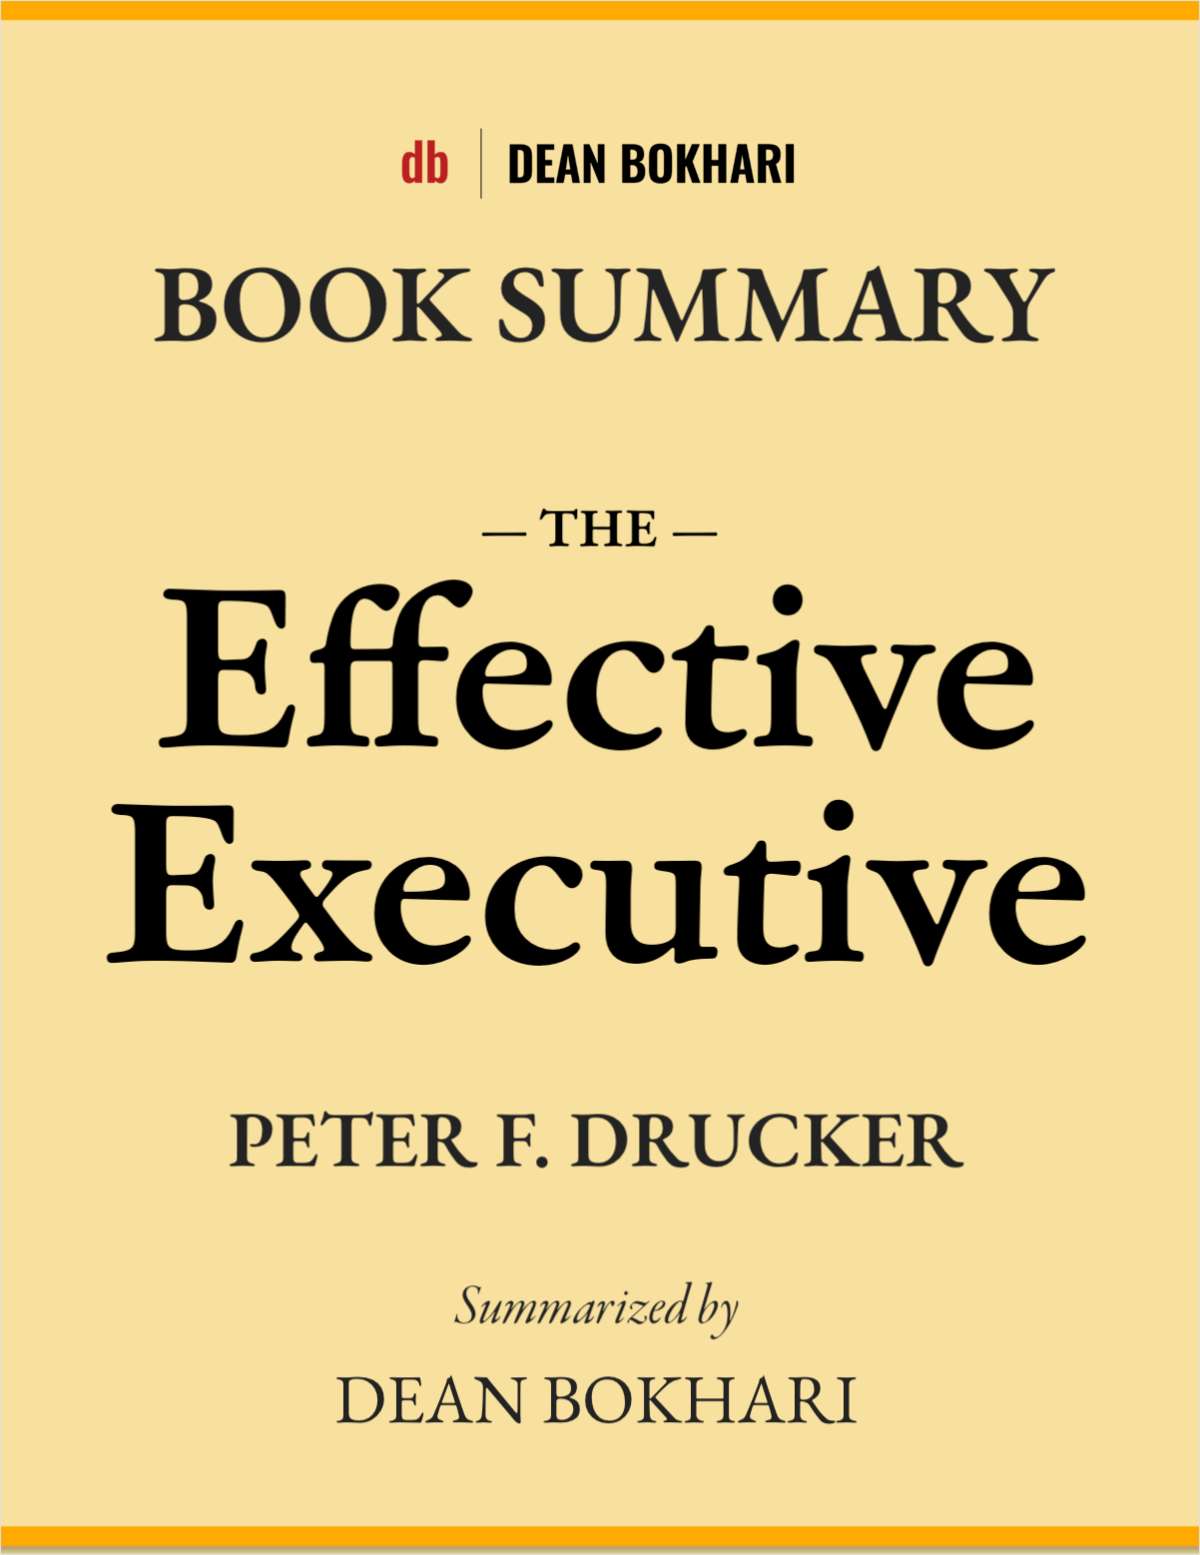 The Effective Executive by Peter Drucker | Book Summary